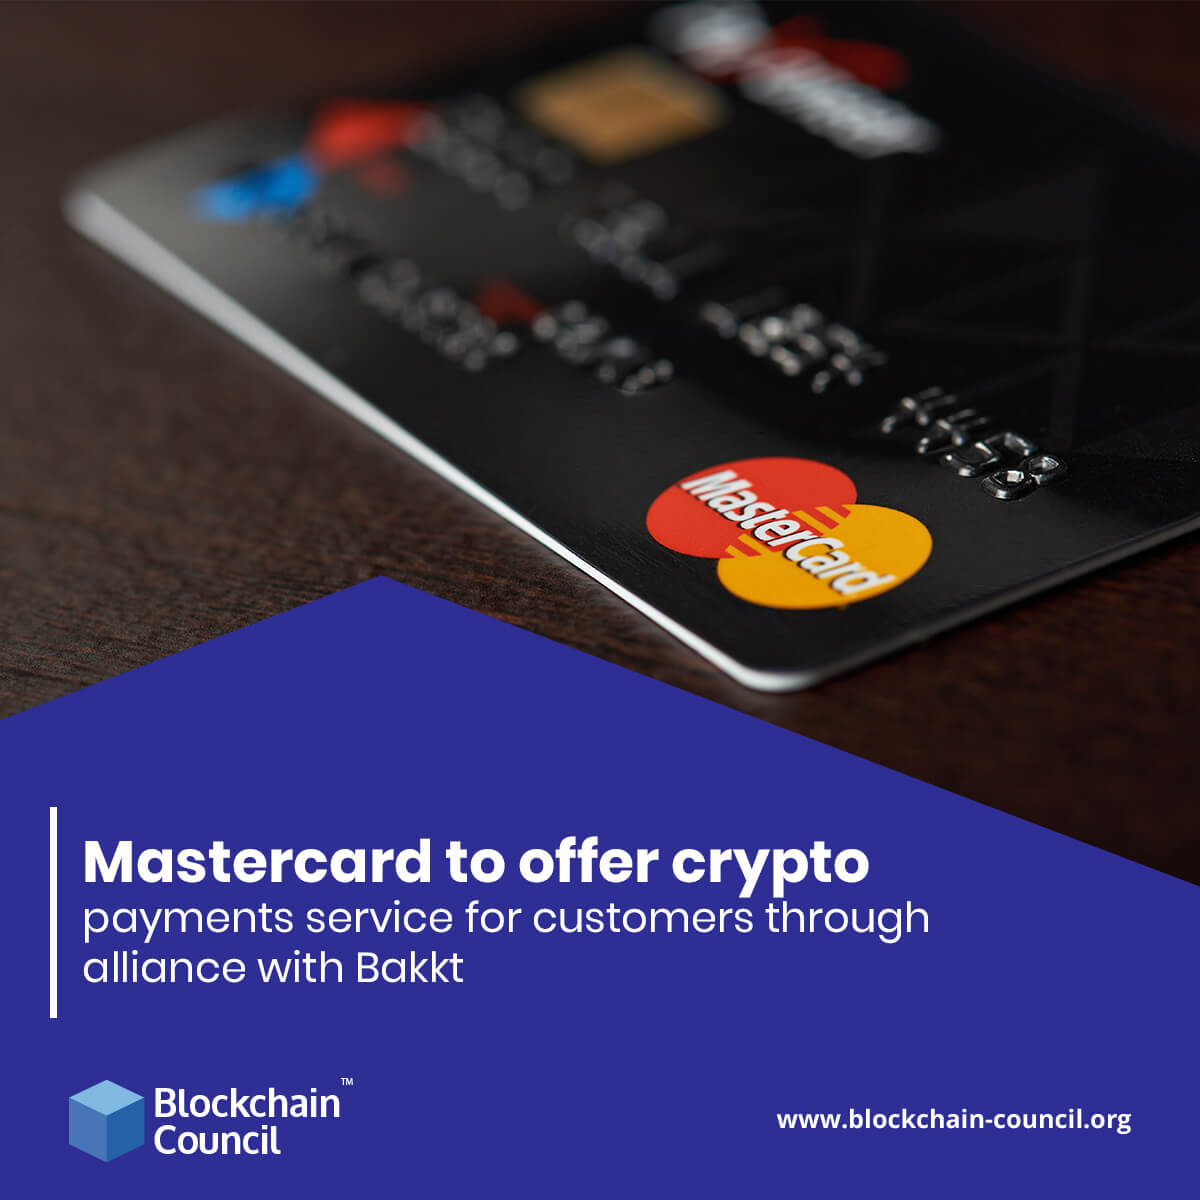 Mastercard to offer crypto payments service for customers through alliance with Bakkt